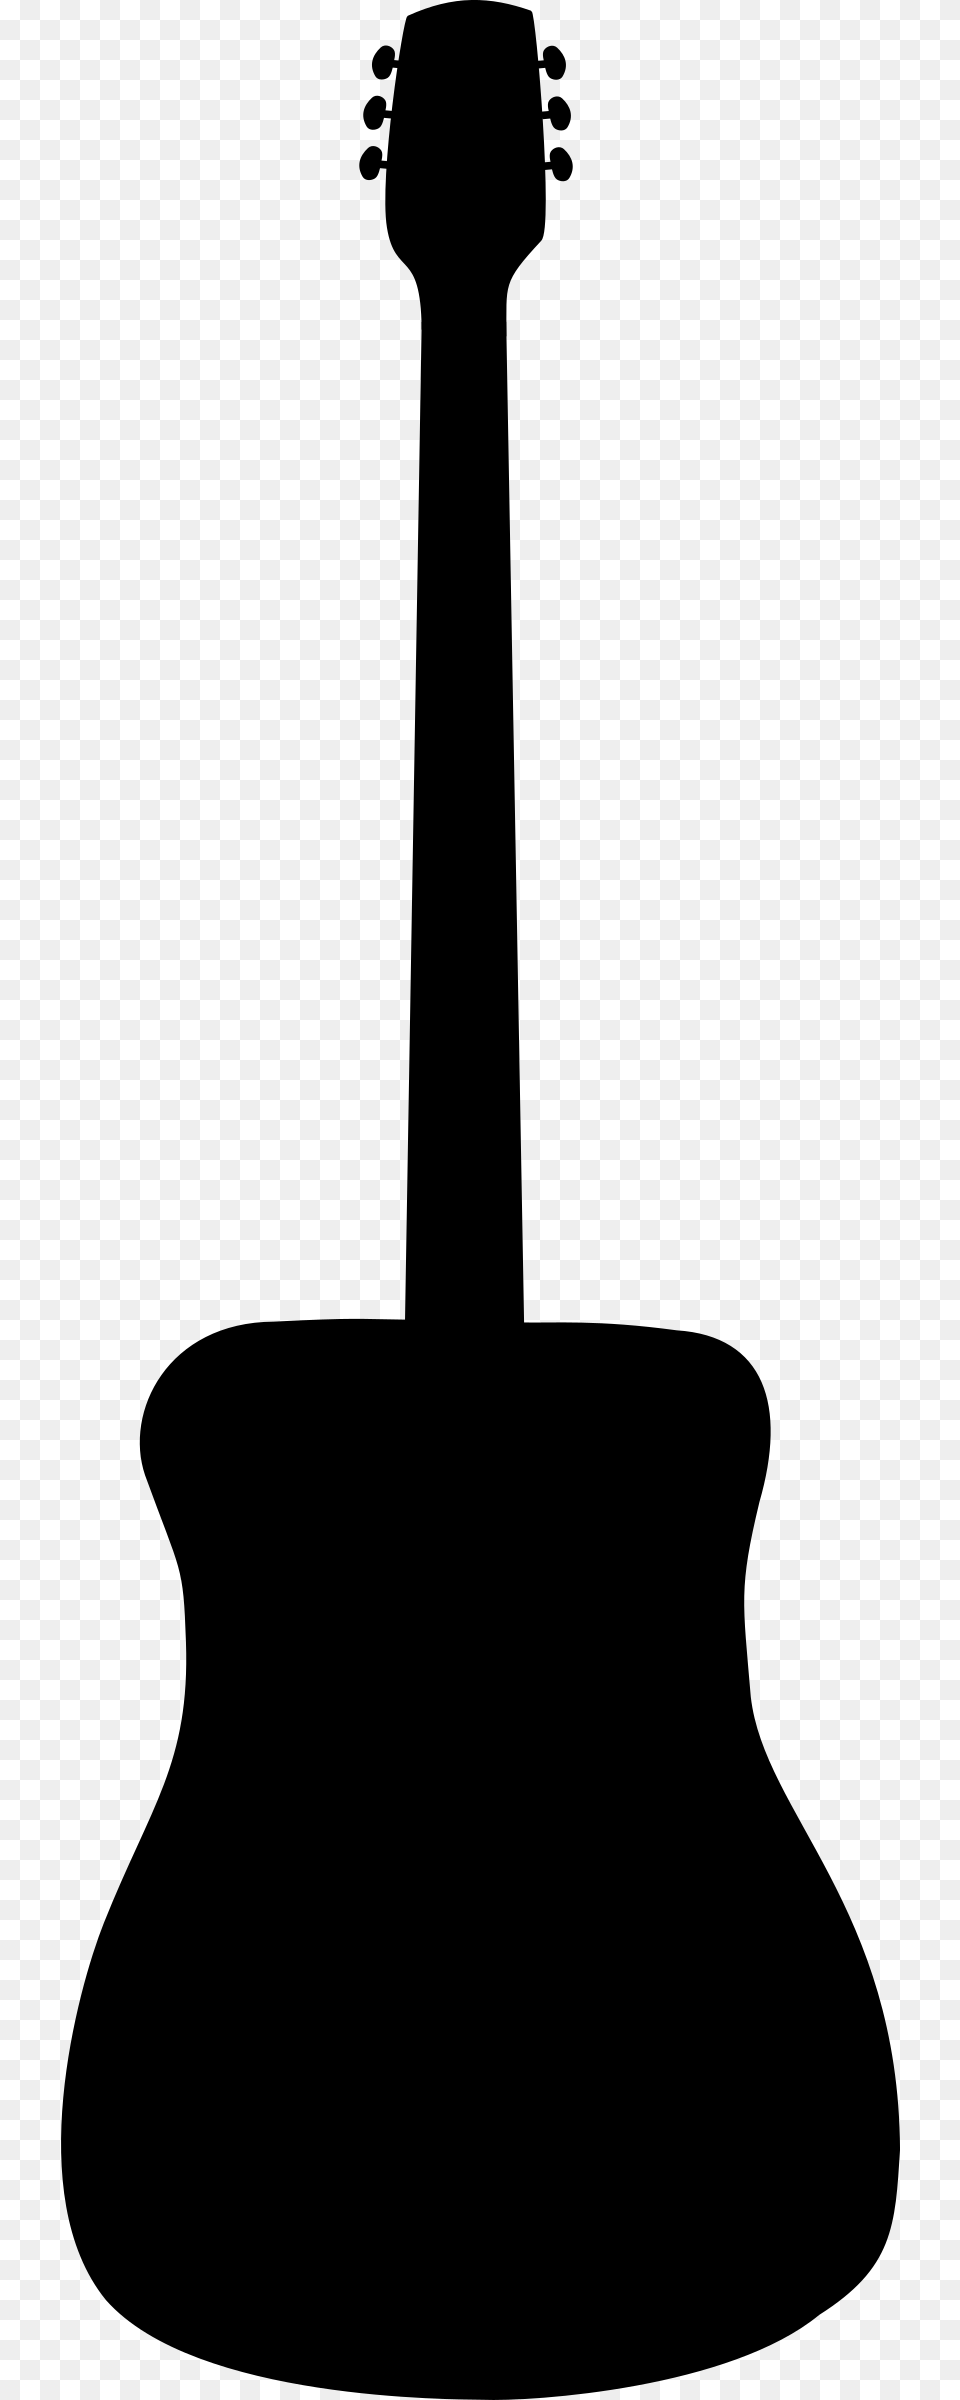 This Icons Design Of Acoustic Guitar Silhouette, Gray Png Image